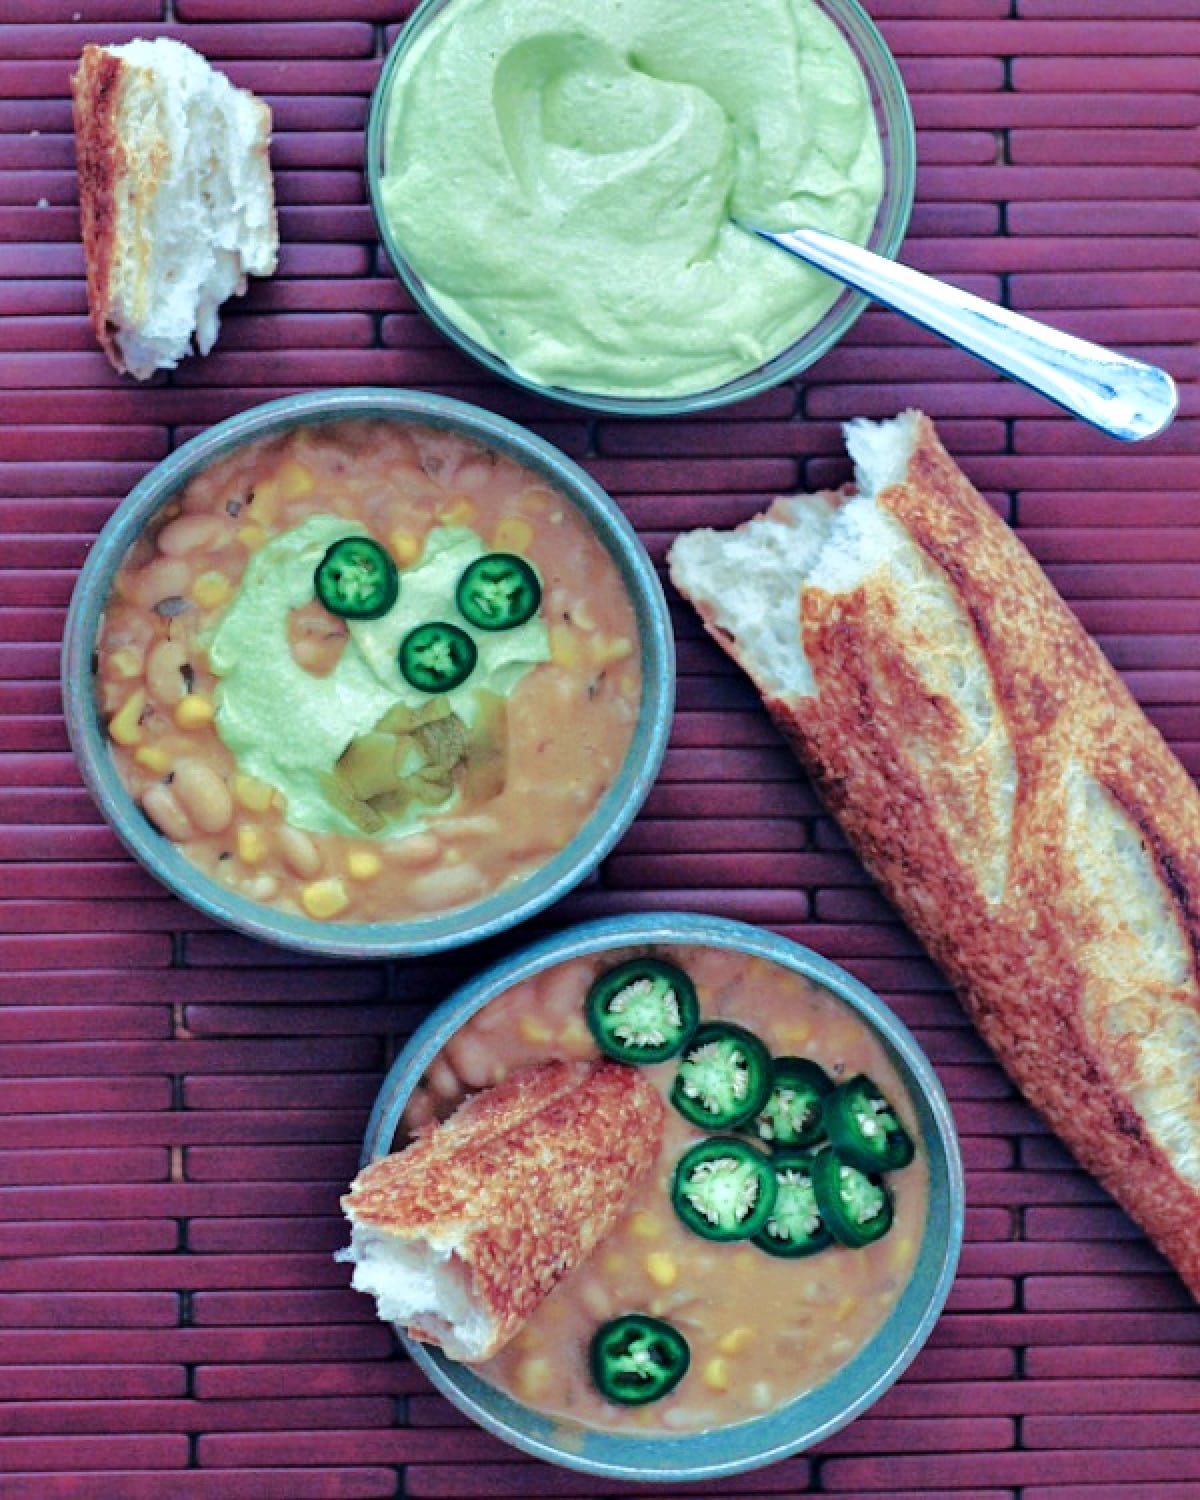 Overhead view of white bean chili in grey bowls, garnished with light green Hatch avocado cream, a piece of crusty baguette, sliced jalapeno peppers.